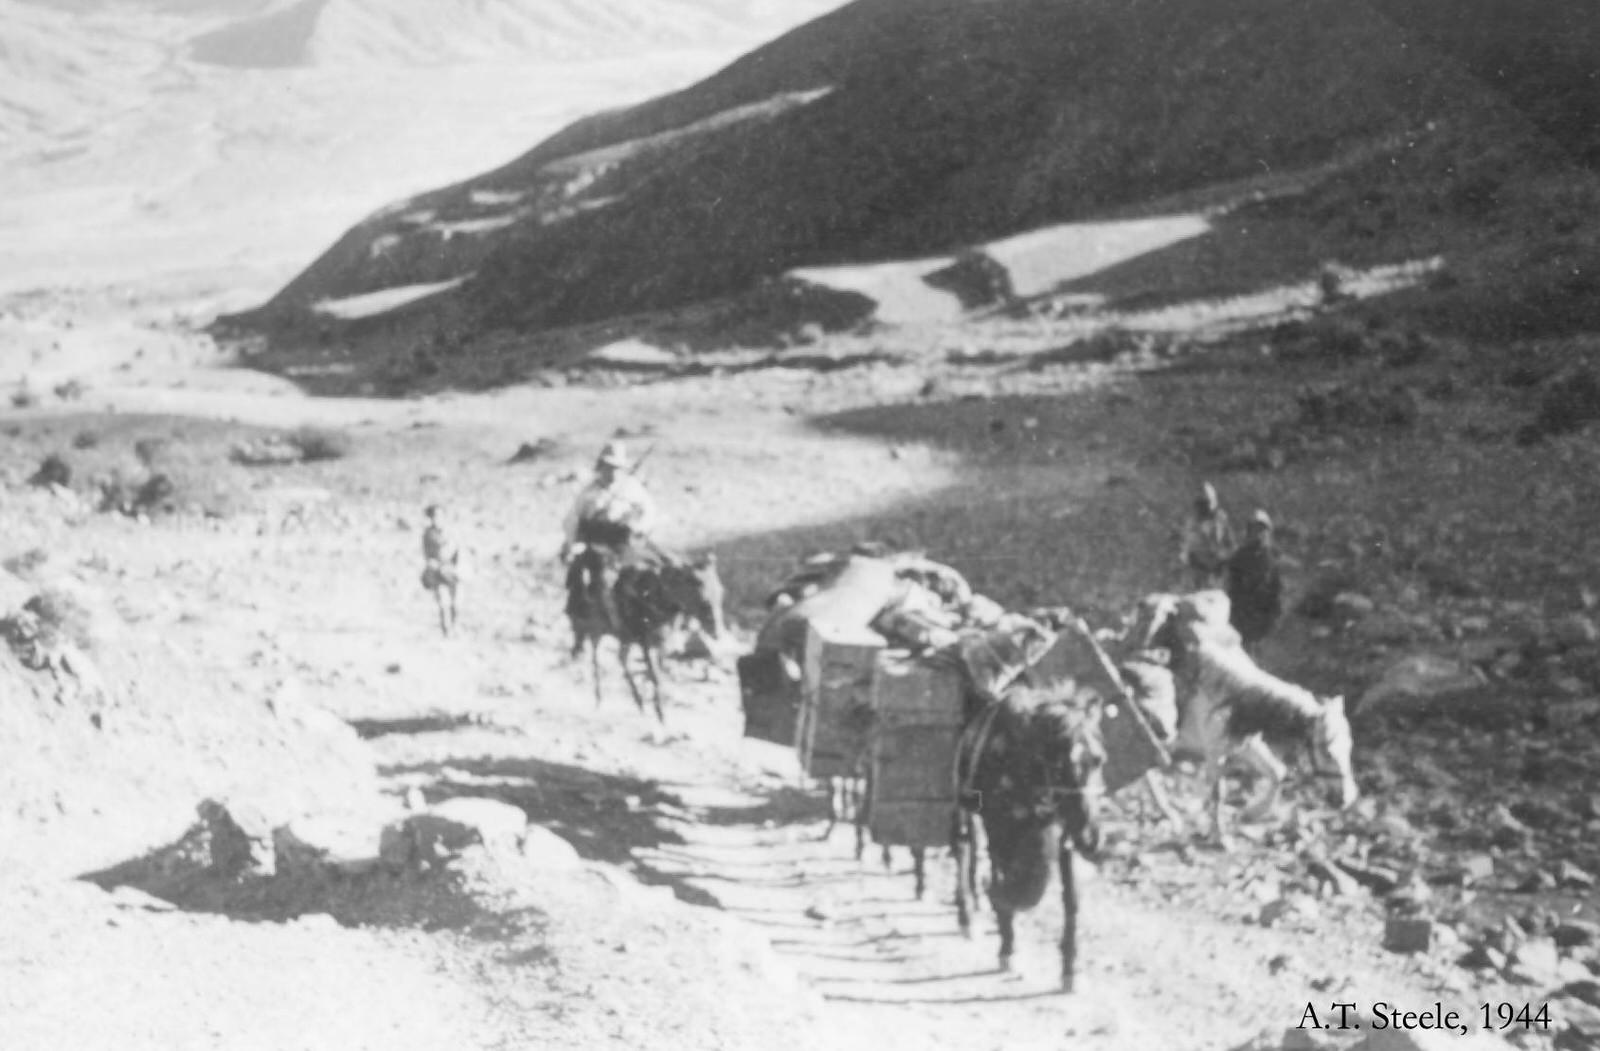 The Chicago Daily News "Expedition" to Lhasa, 1944